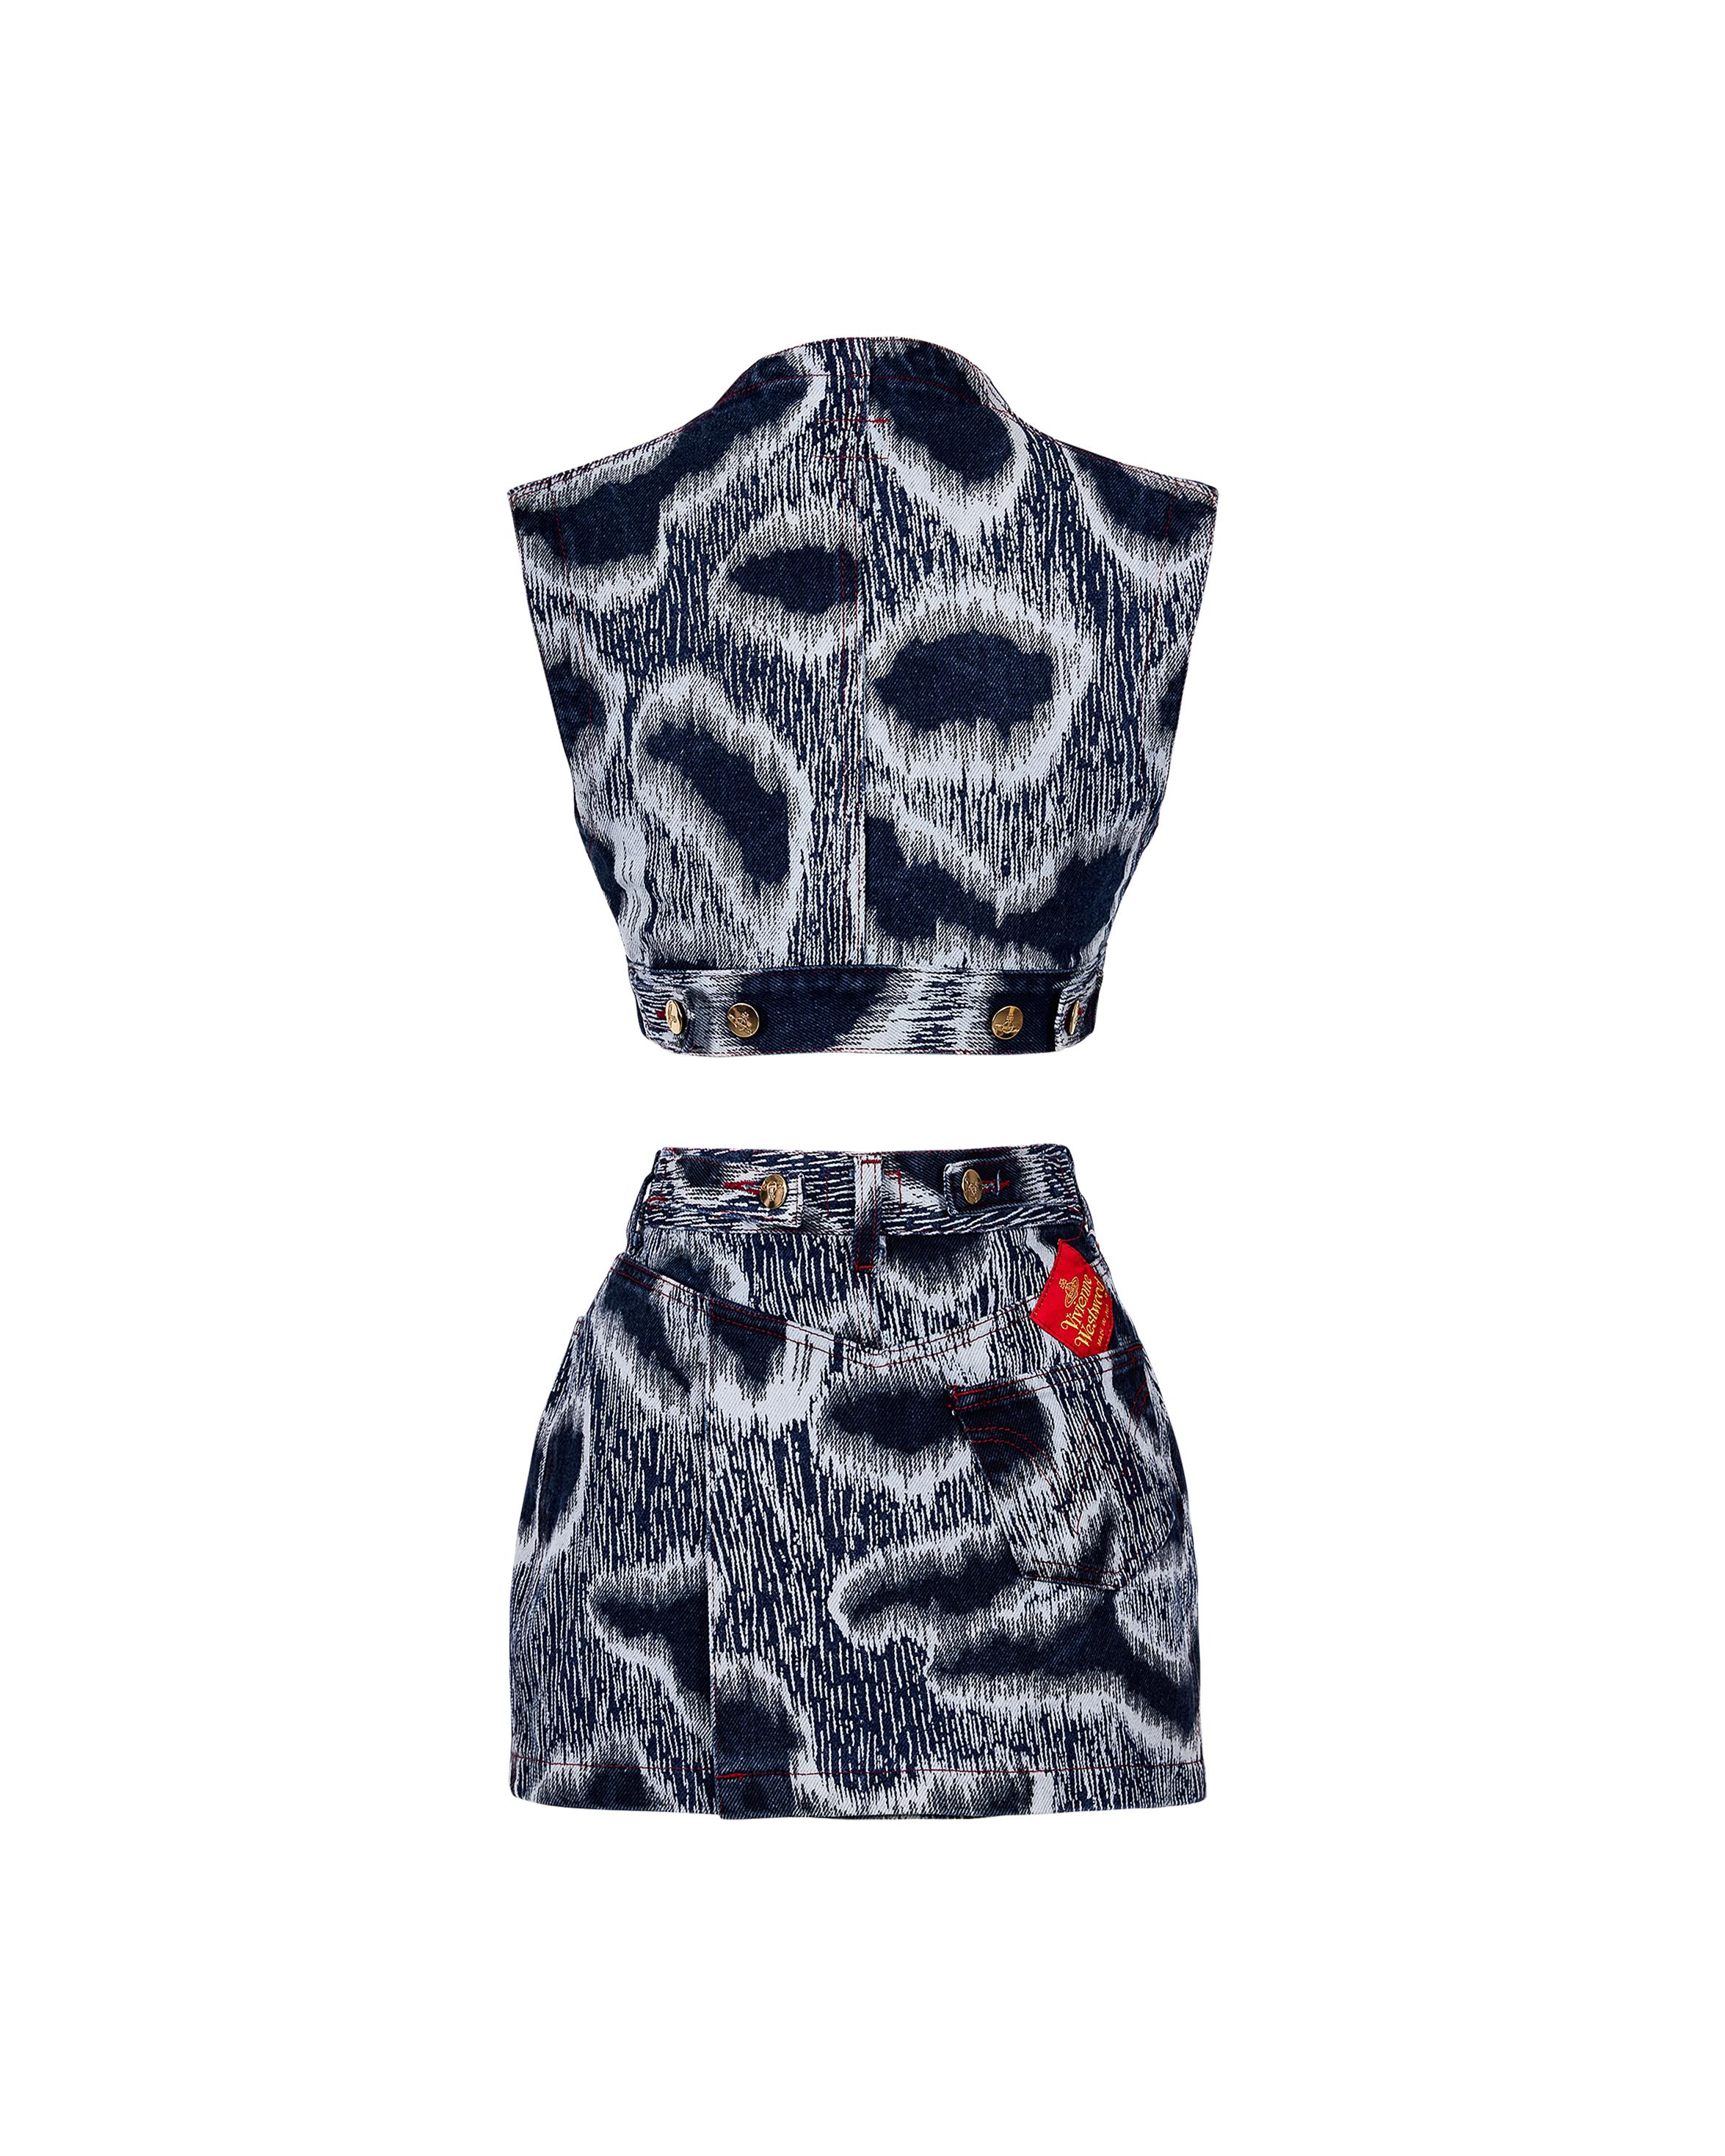 S/S 1994 Vivienne Westwood Blue Leopard Print Denim Skirt Set In Excellent Condition In North Hollywood, CA